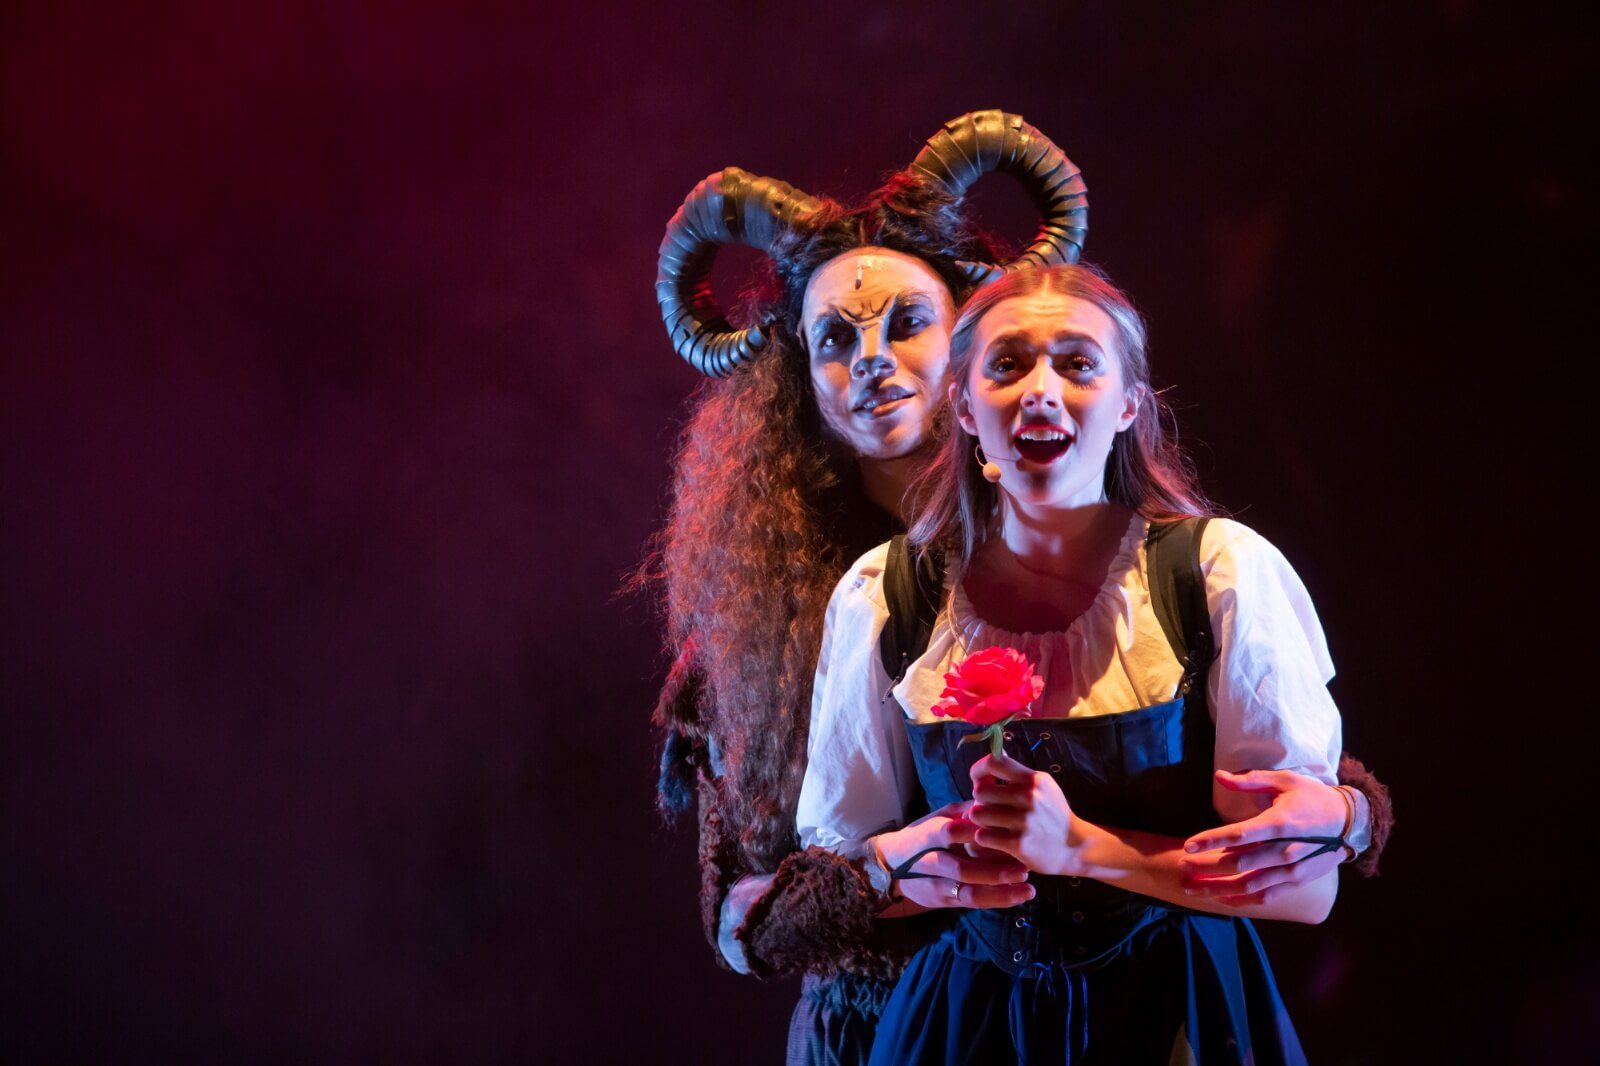 Beauty and the Beast at The Old Rep Theatre Birmingham: Review